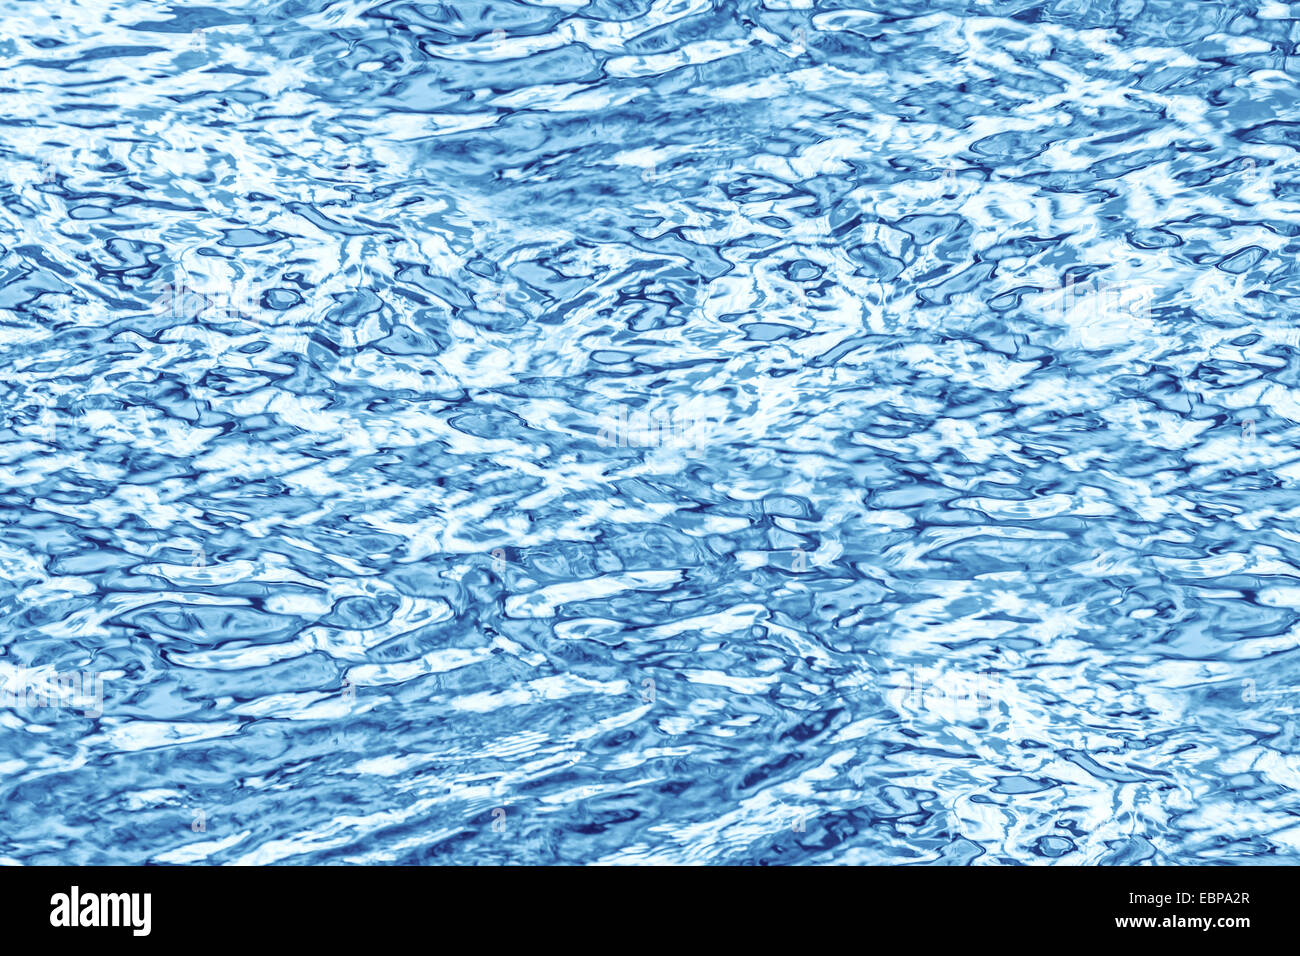 Abstract background made of reflections in the water. Stock Photo